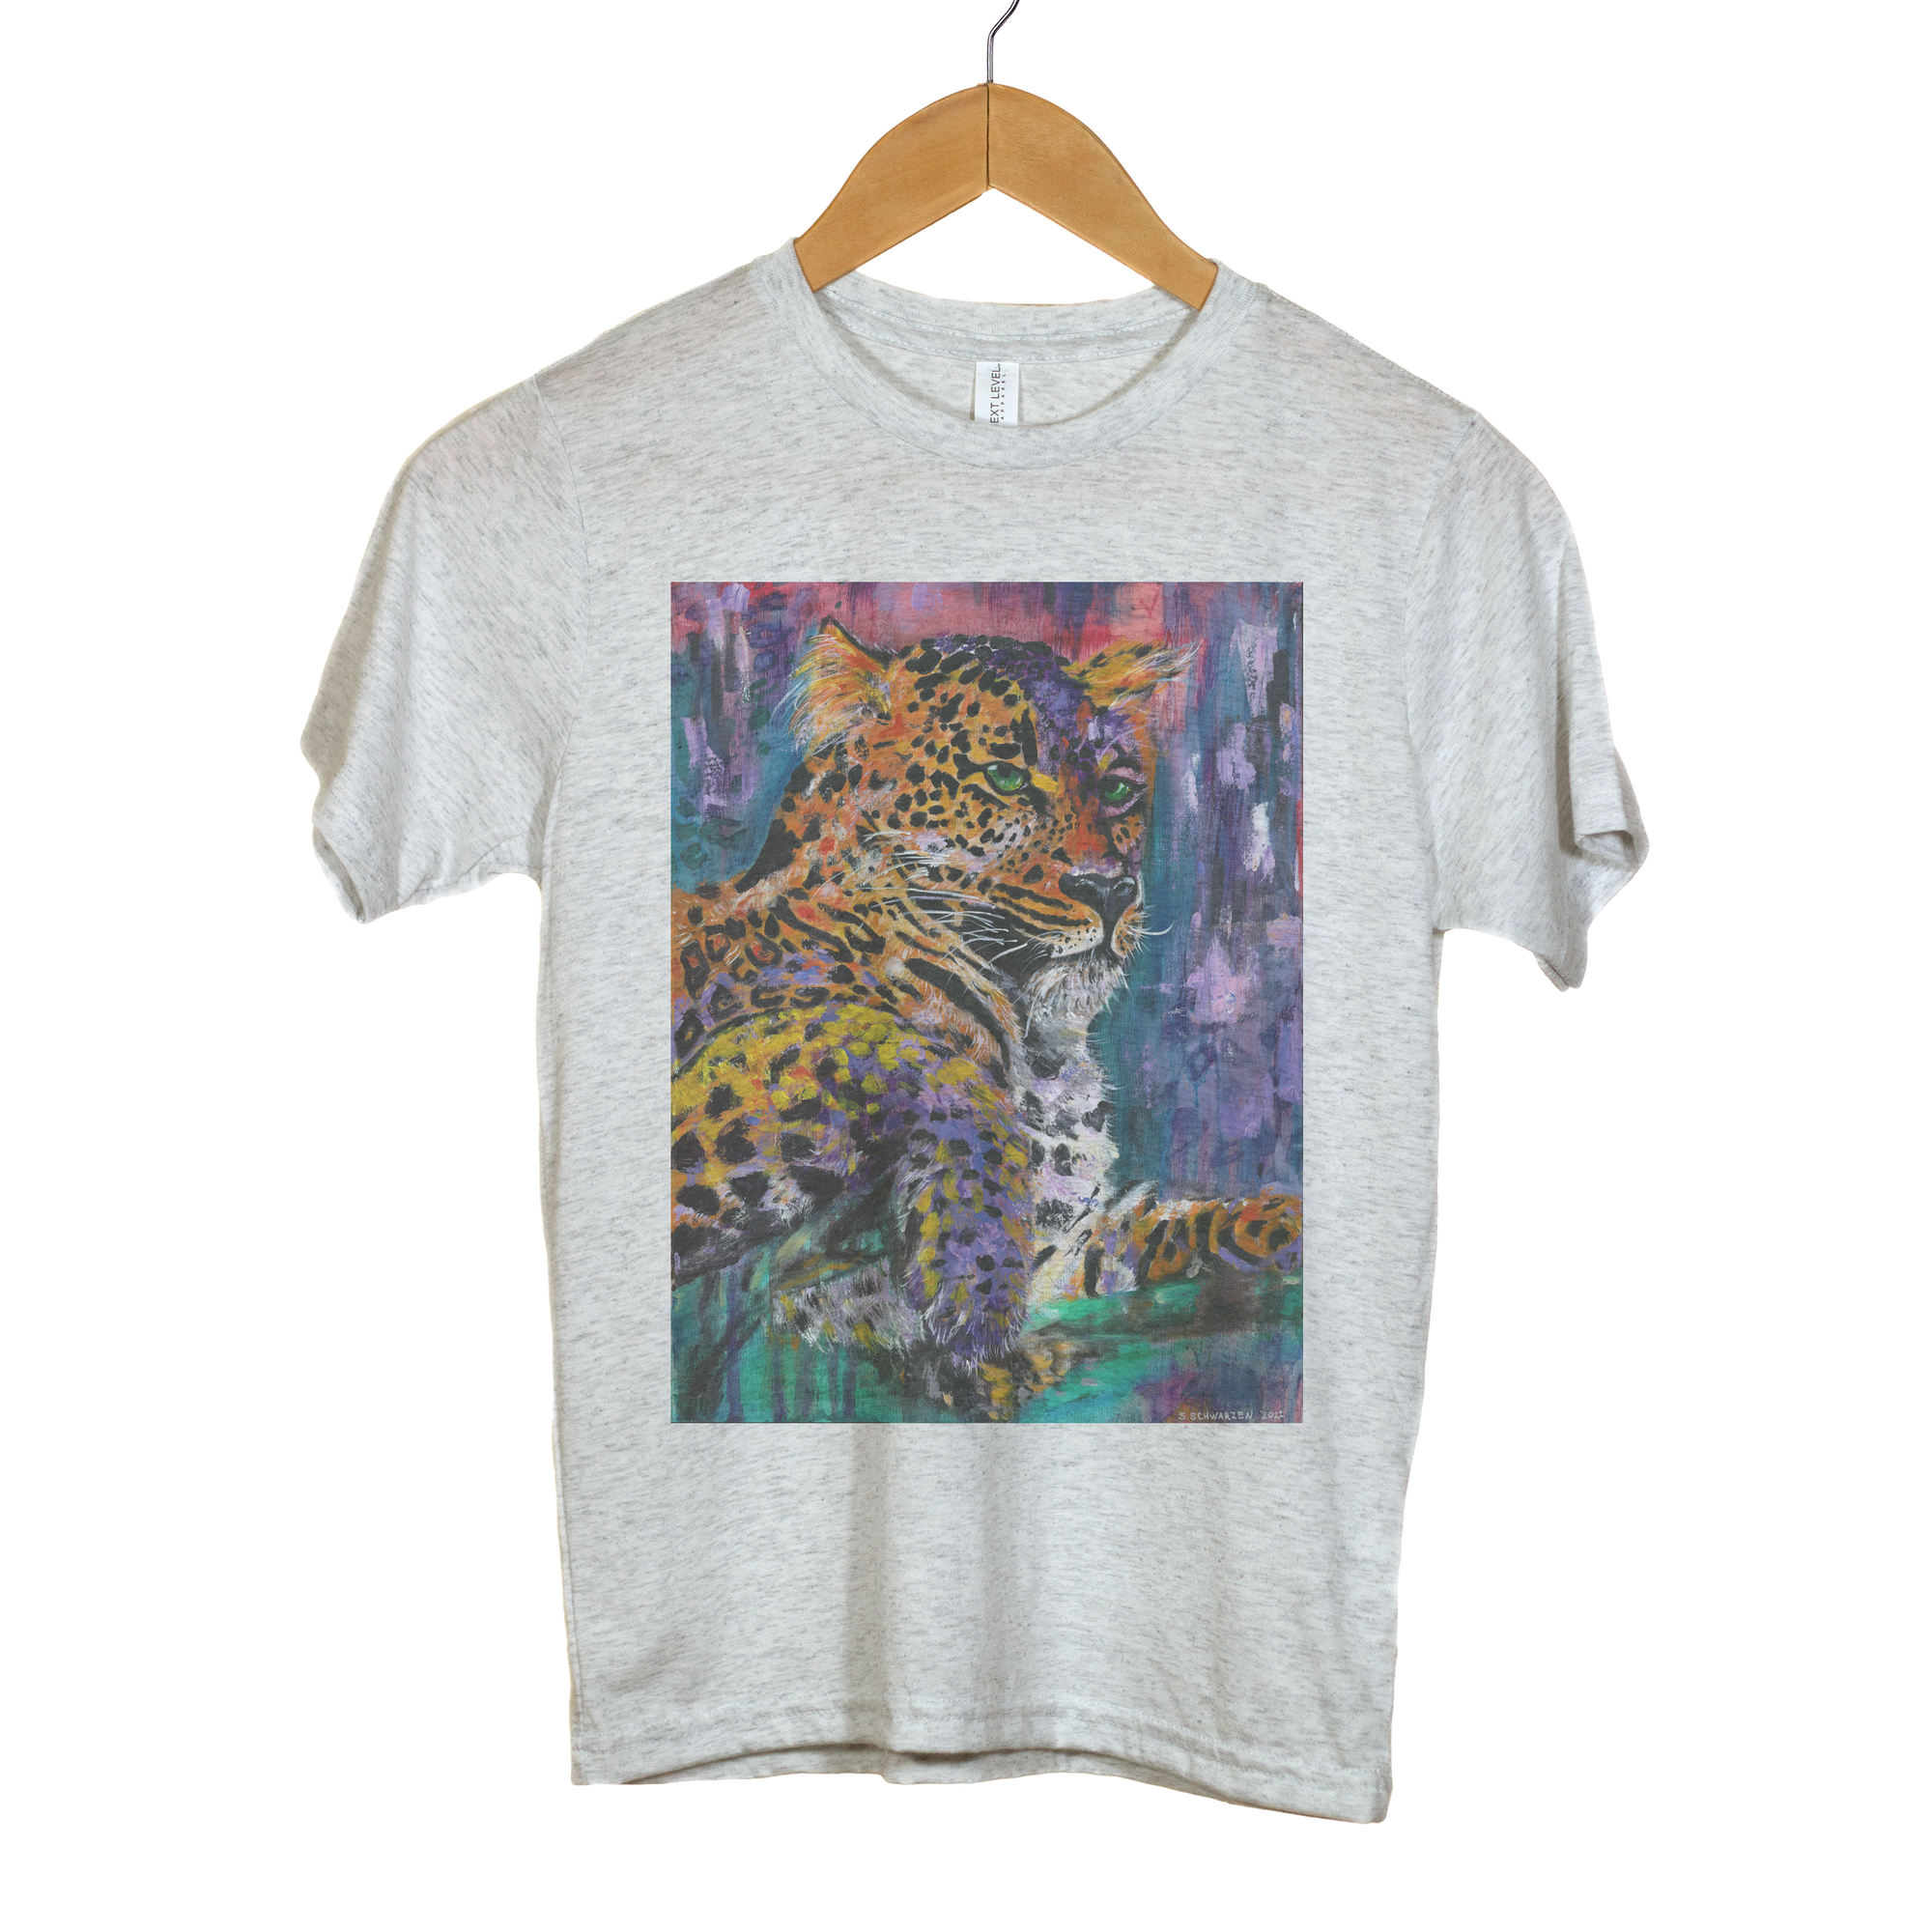 "Ava the Royal Leopard" - YOUTH Triblend Tee